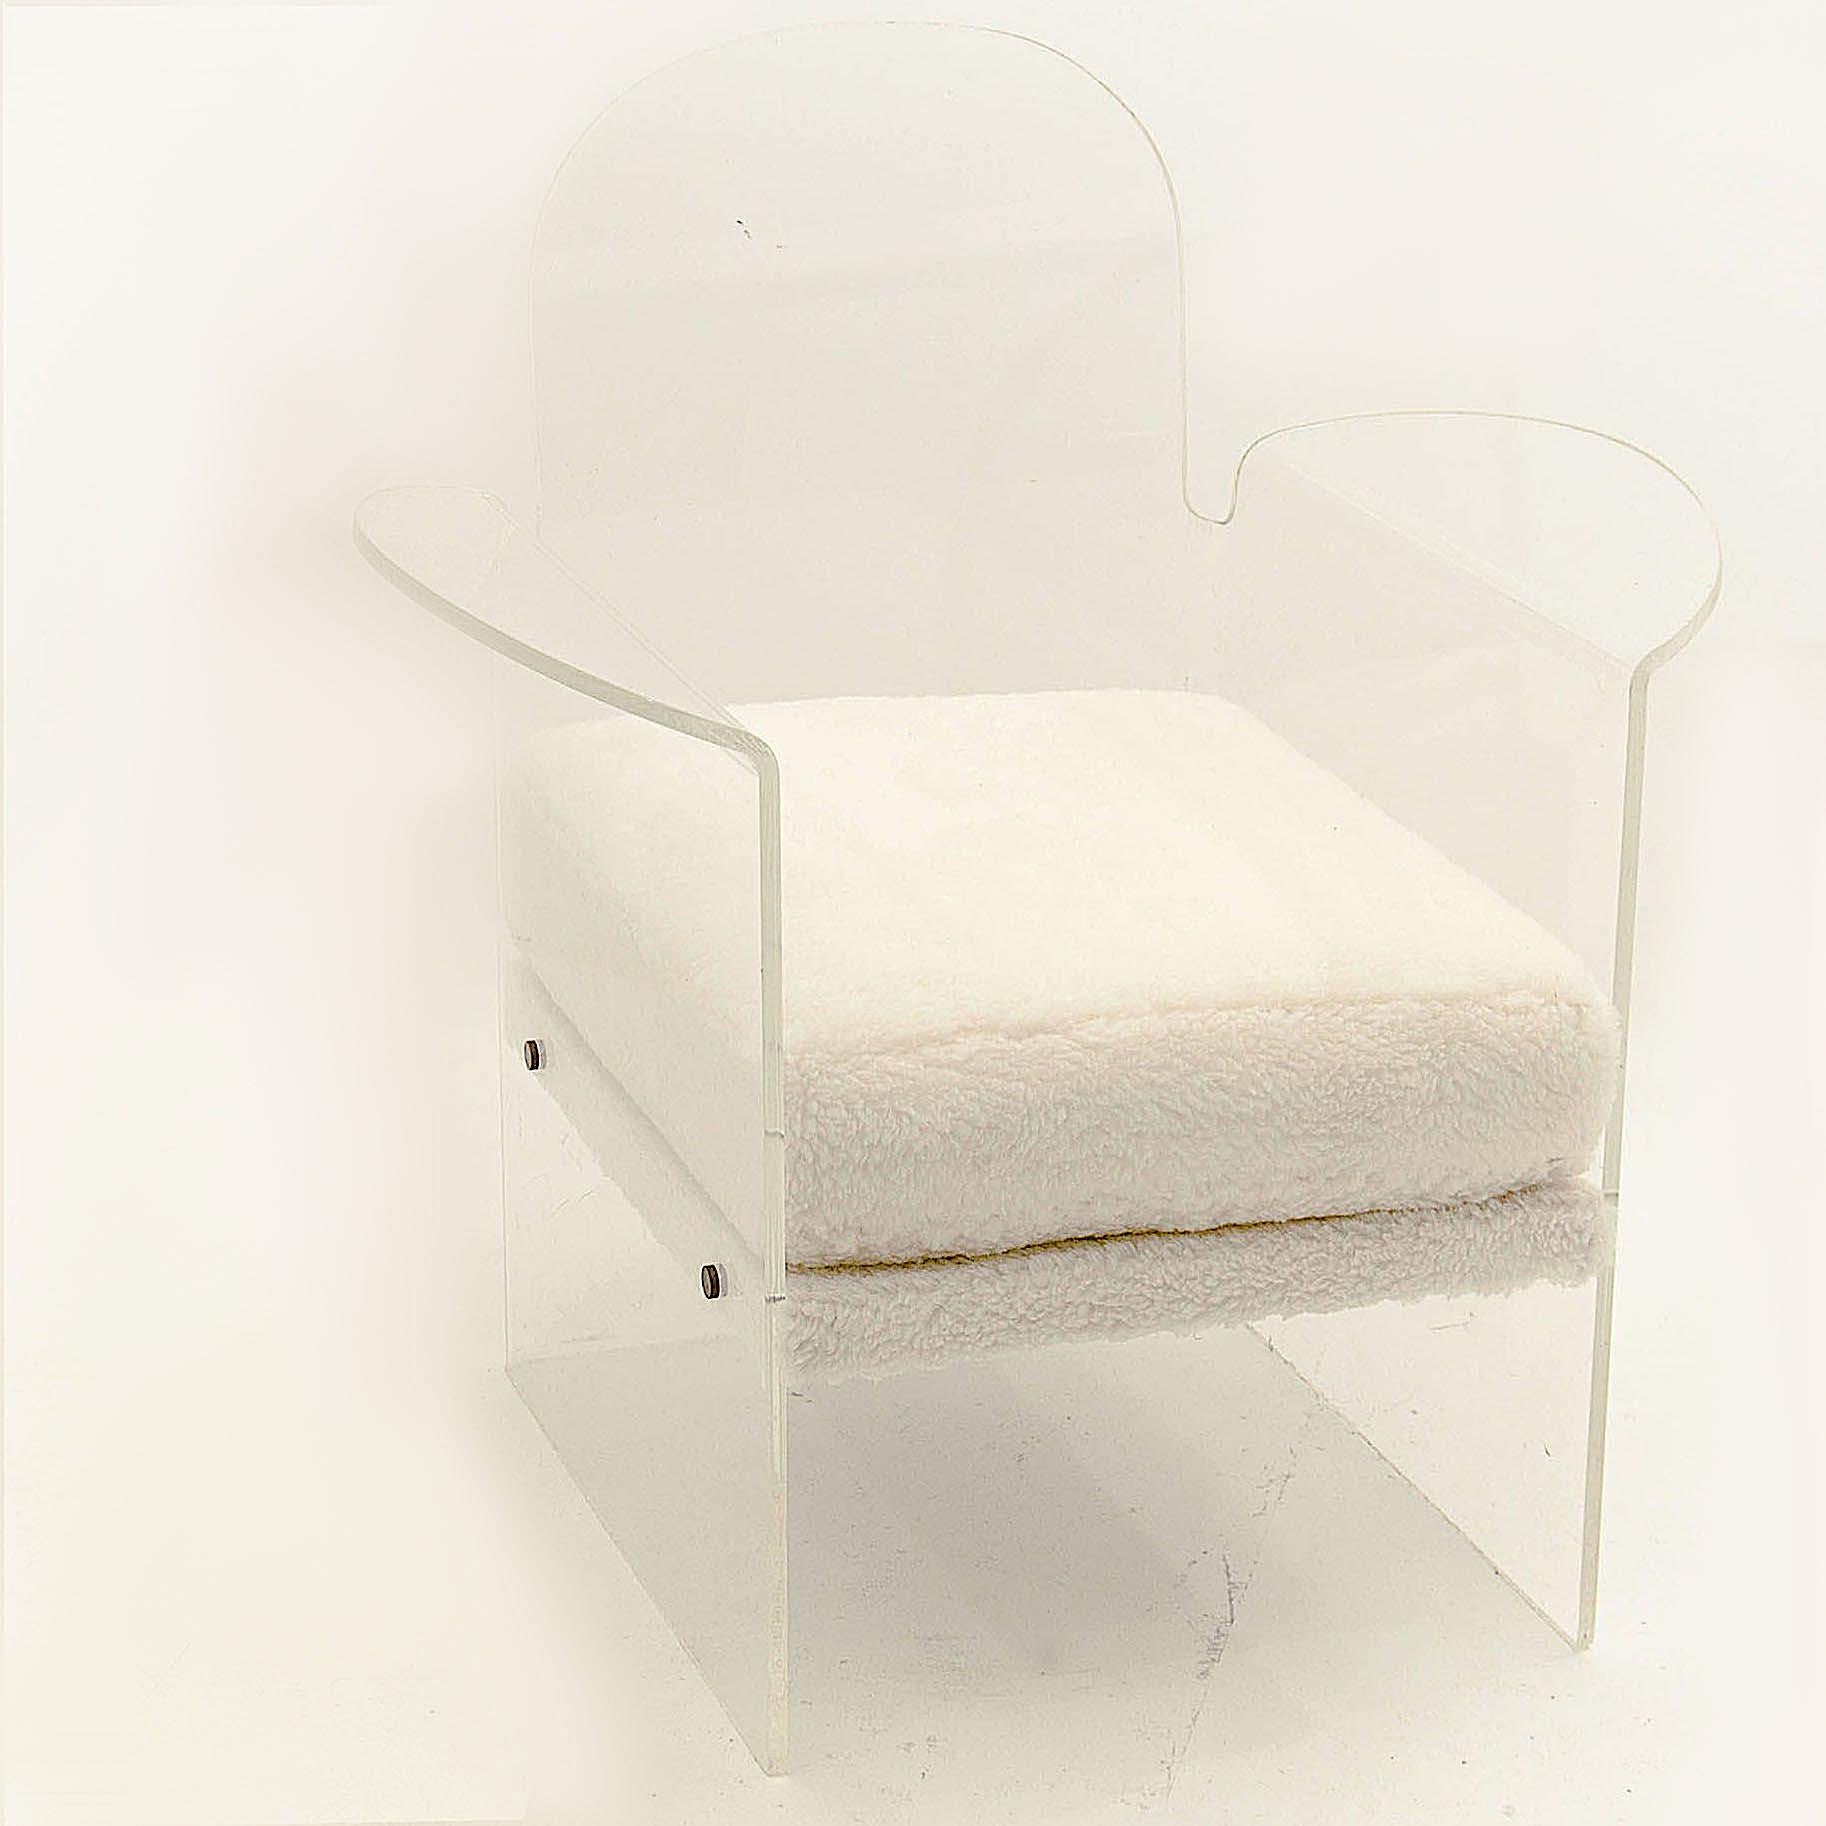 The Lucite give the armchair a feeling of purity, and at the same time the white plush fabric, add a warm sensation when looking at it.
The Lucite panels are mounted together with high quality steel cast screws. it has been newly re-upholstered, by